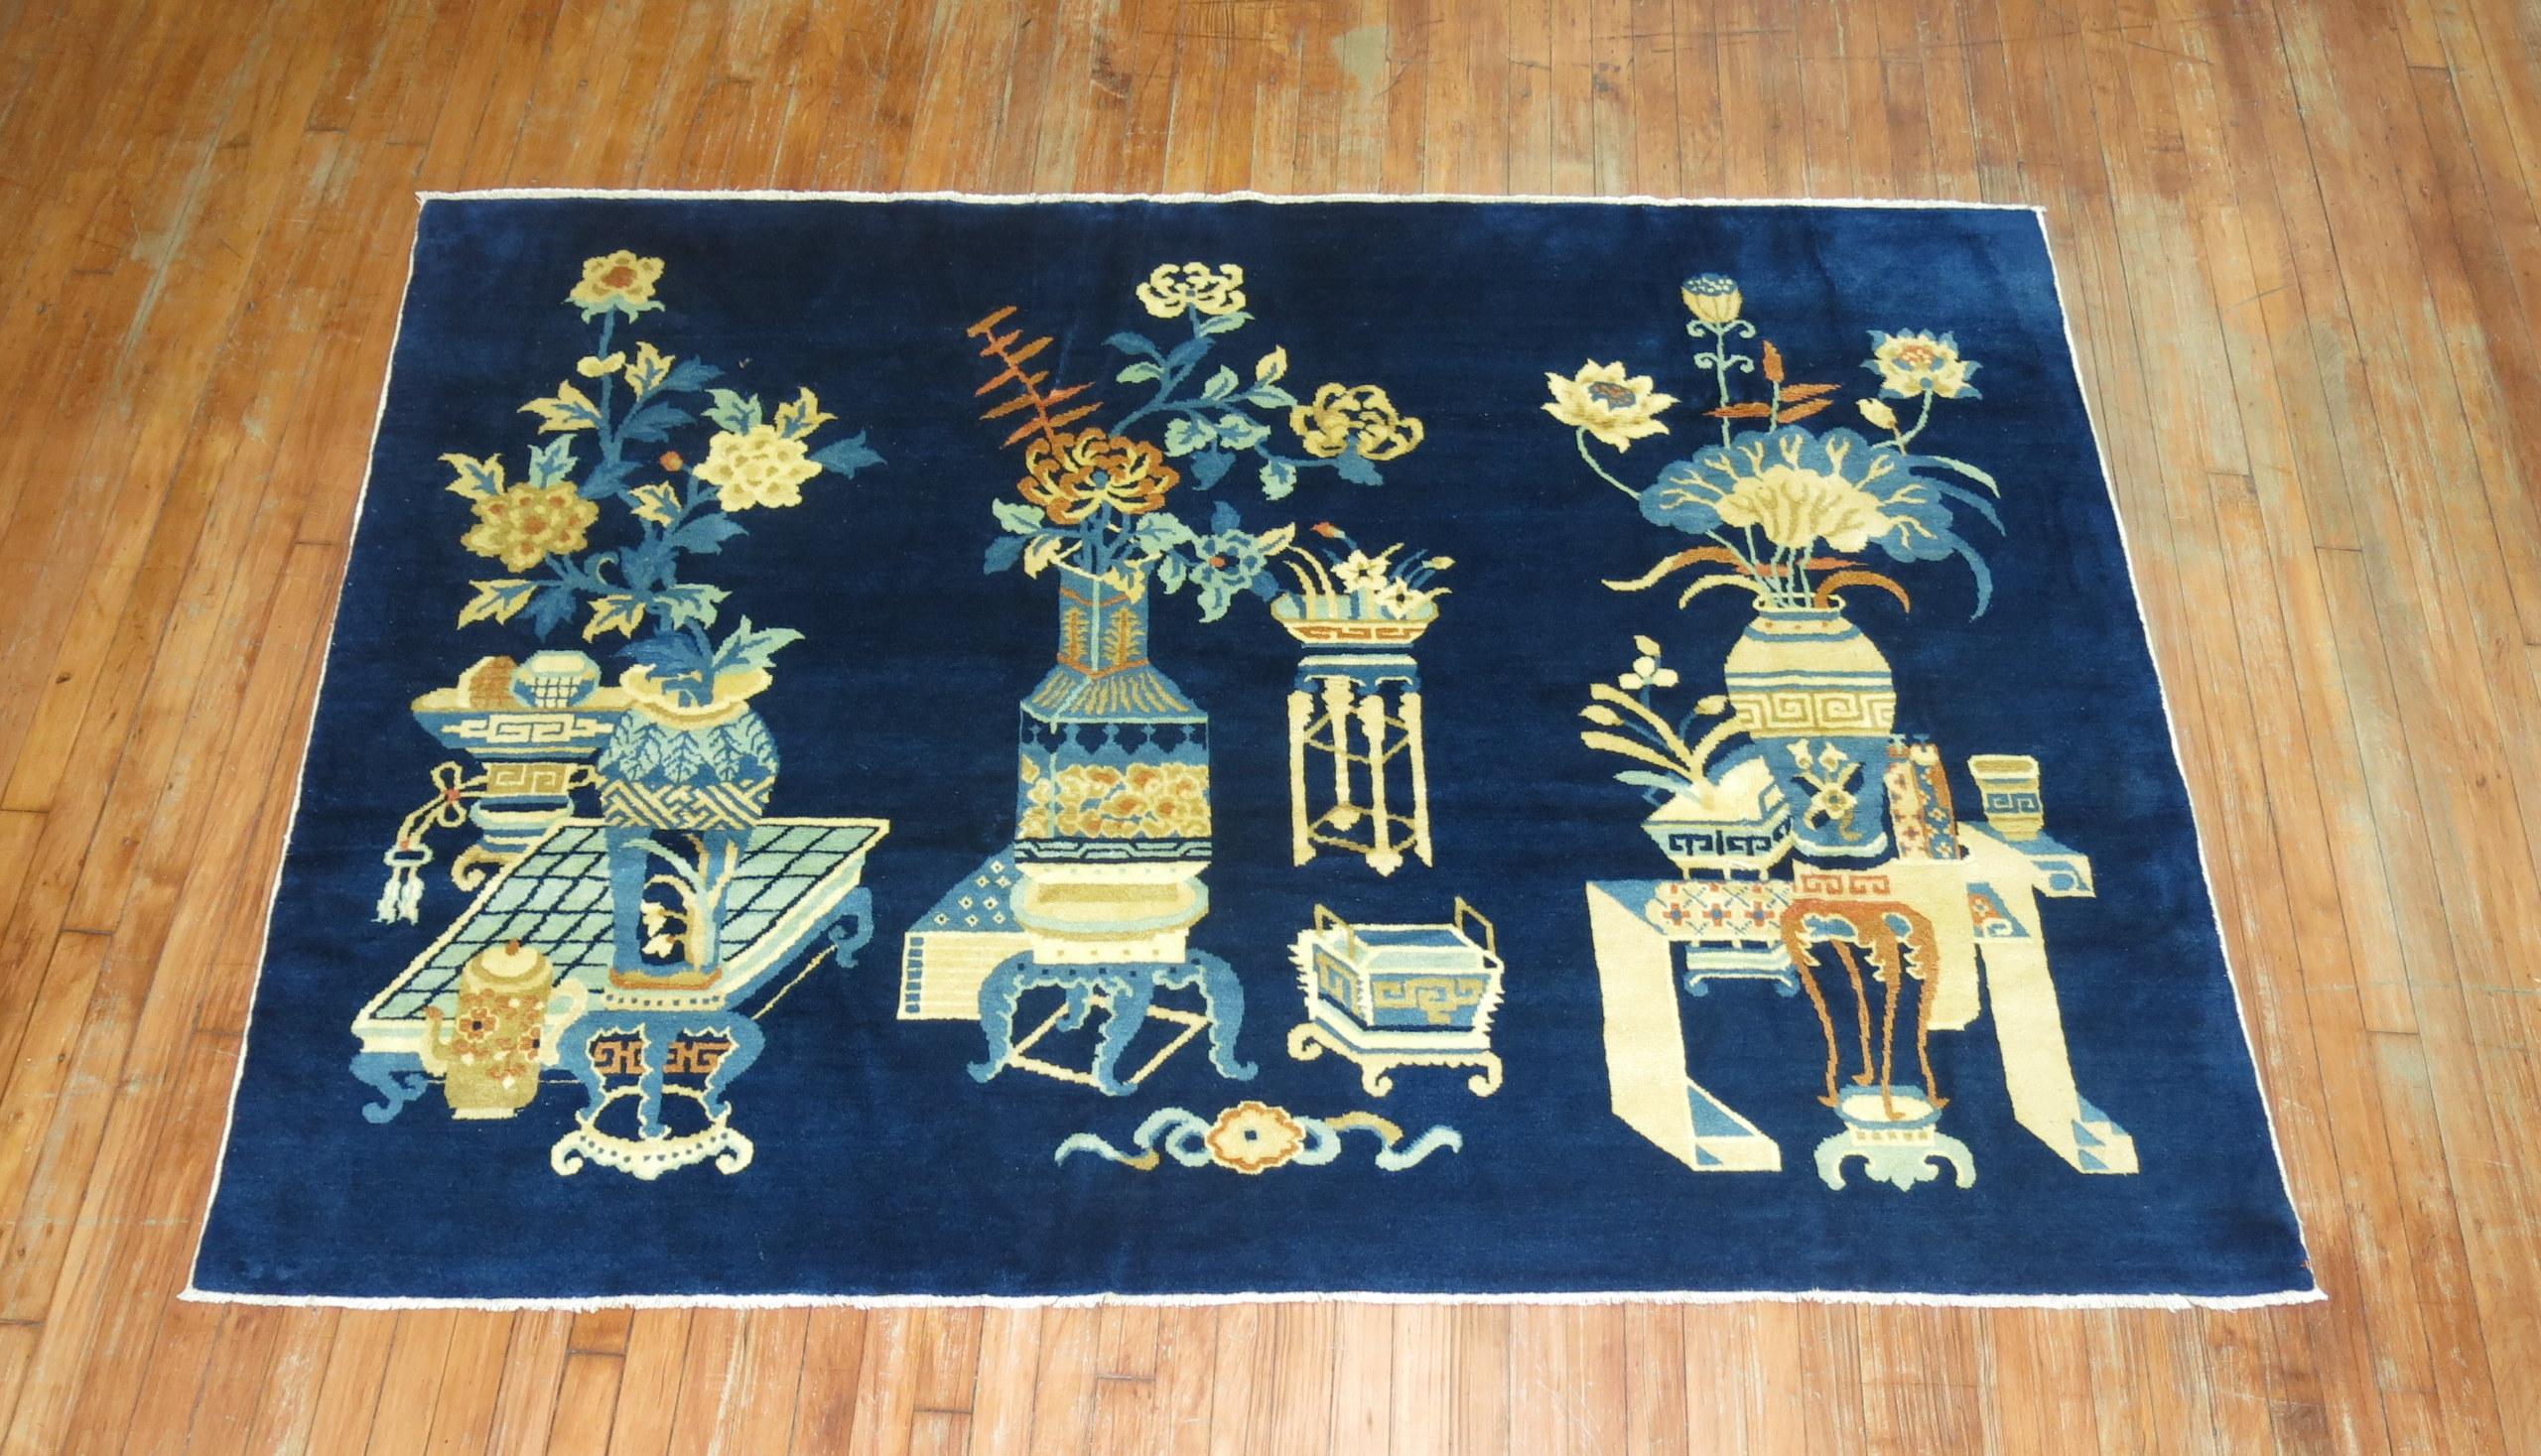 A Chinese pictographic rug in predominant shades blue. The wool is very soft and all the colors are natural. Soft on the feet.